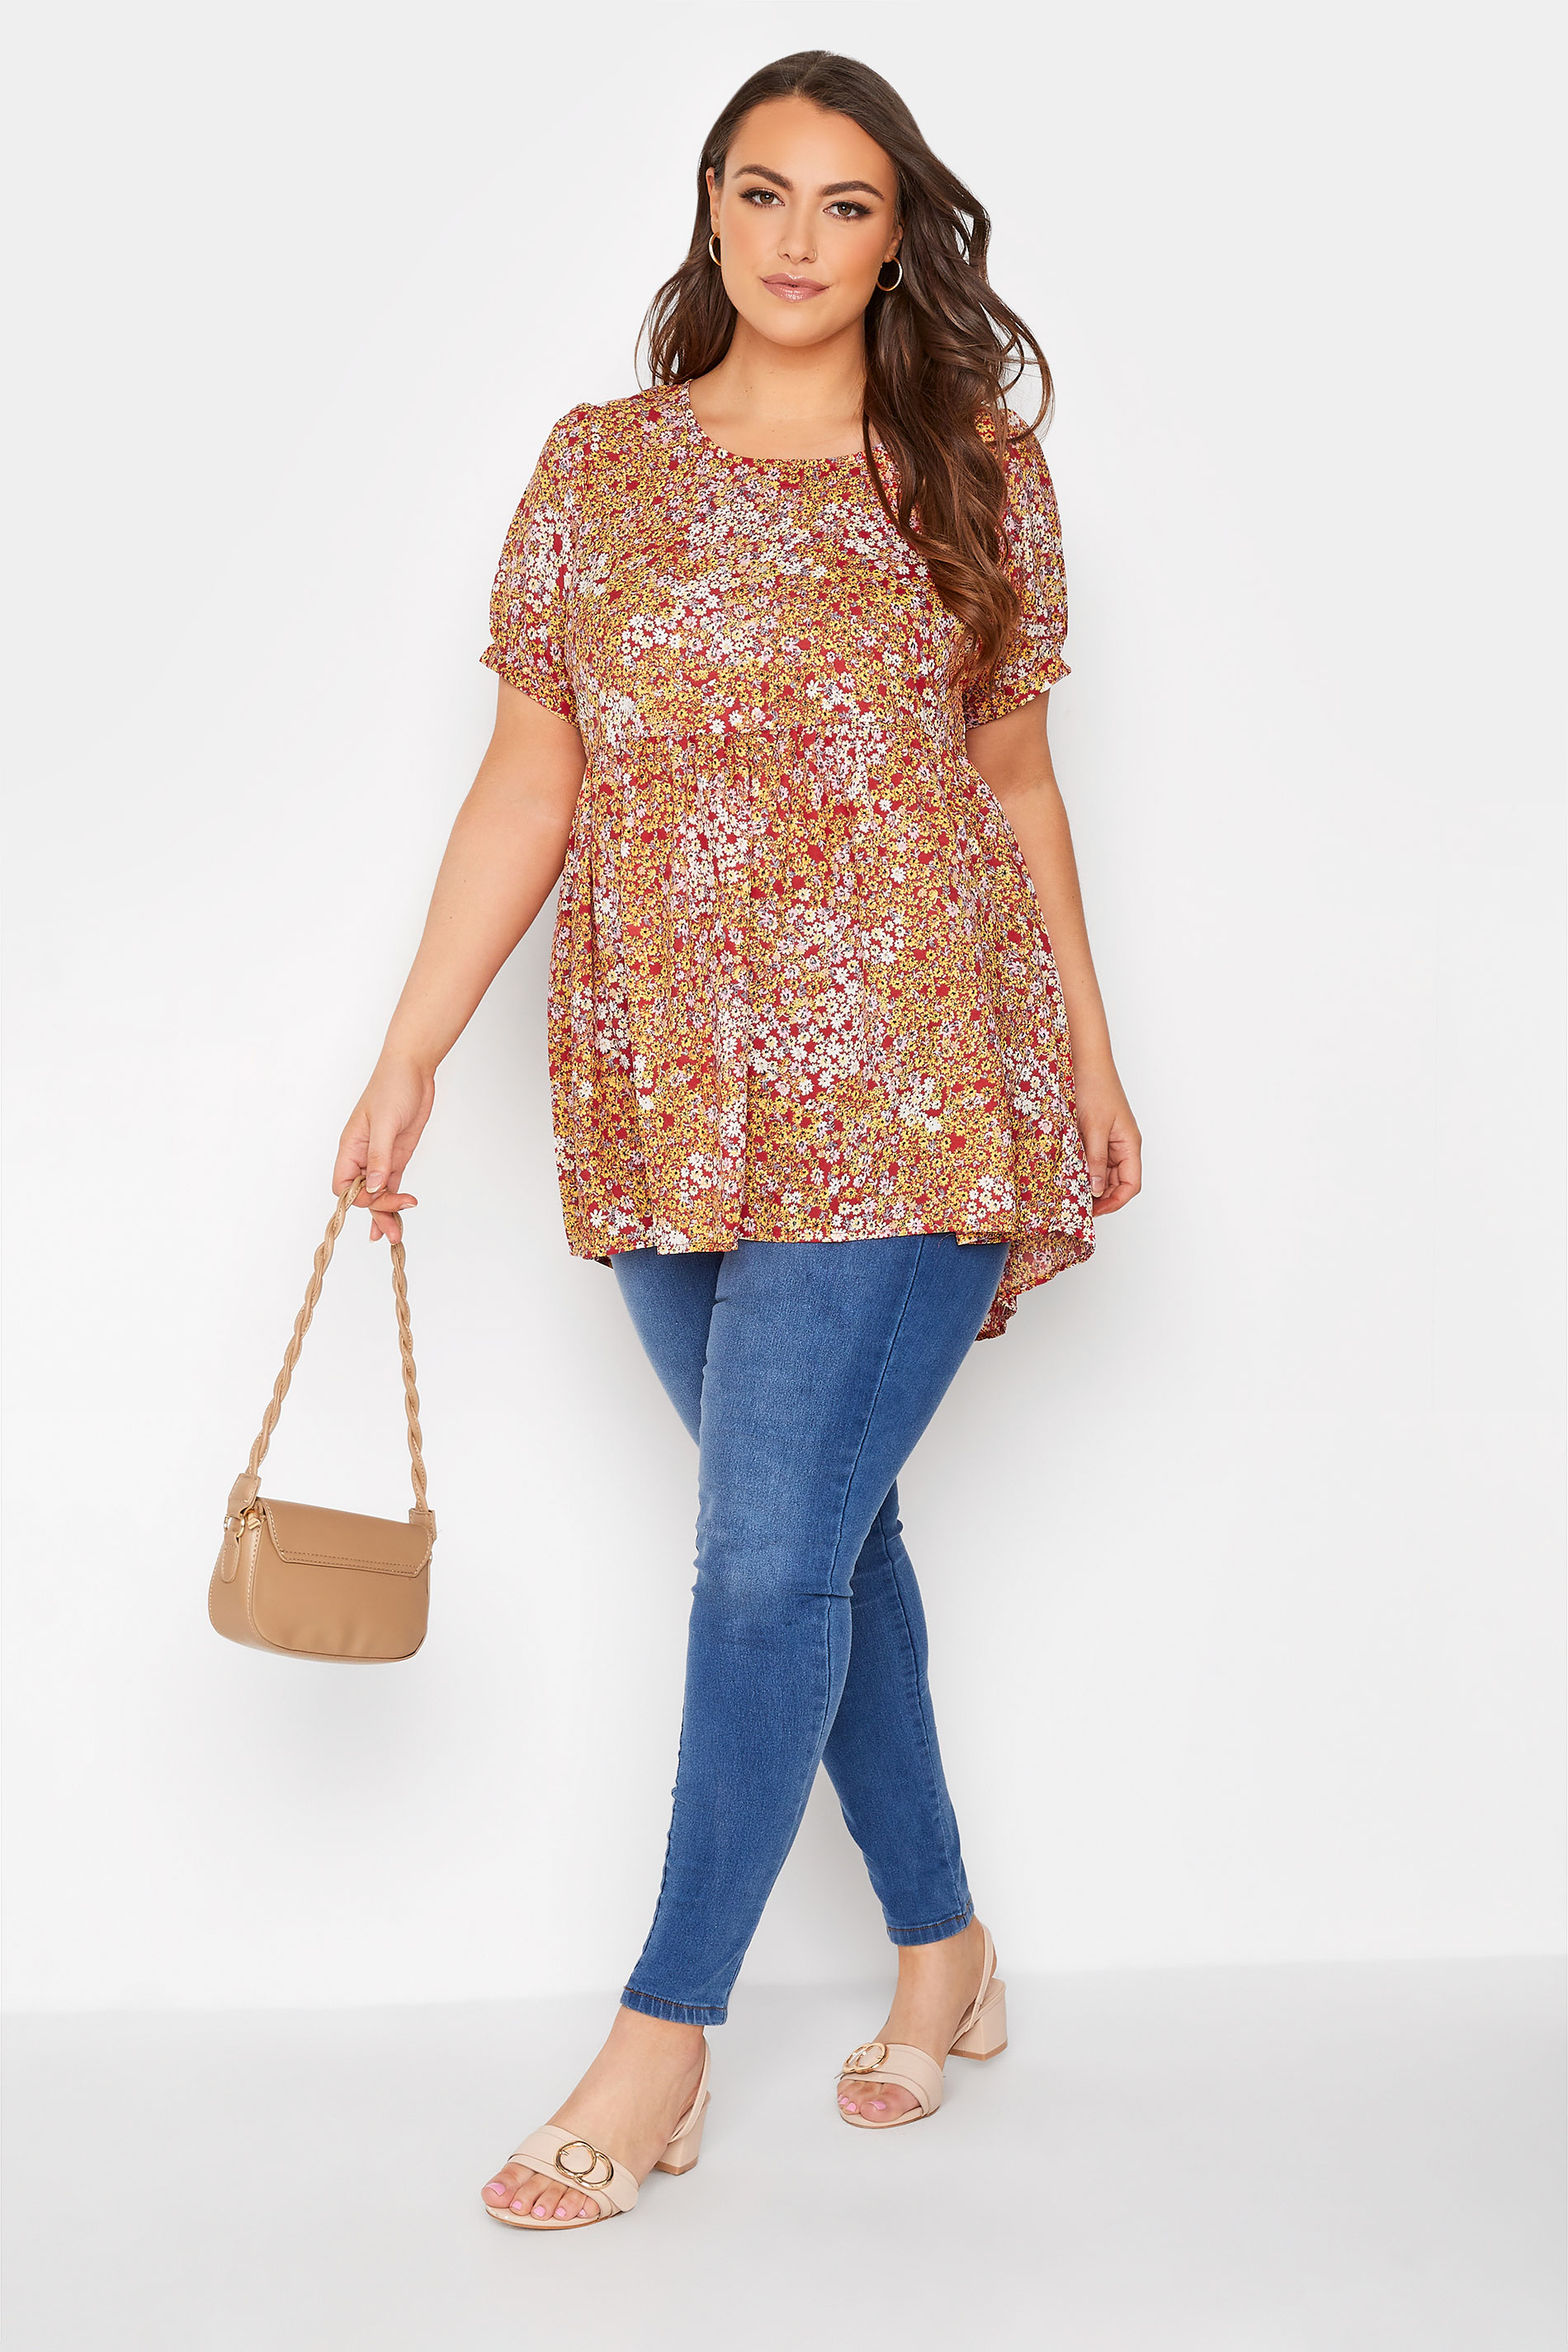 Grande taille  Tops Grande taille  Tops Jersey | Top Orange Imprimé Floral Manches Bouffantes - BN33060